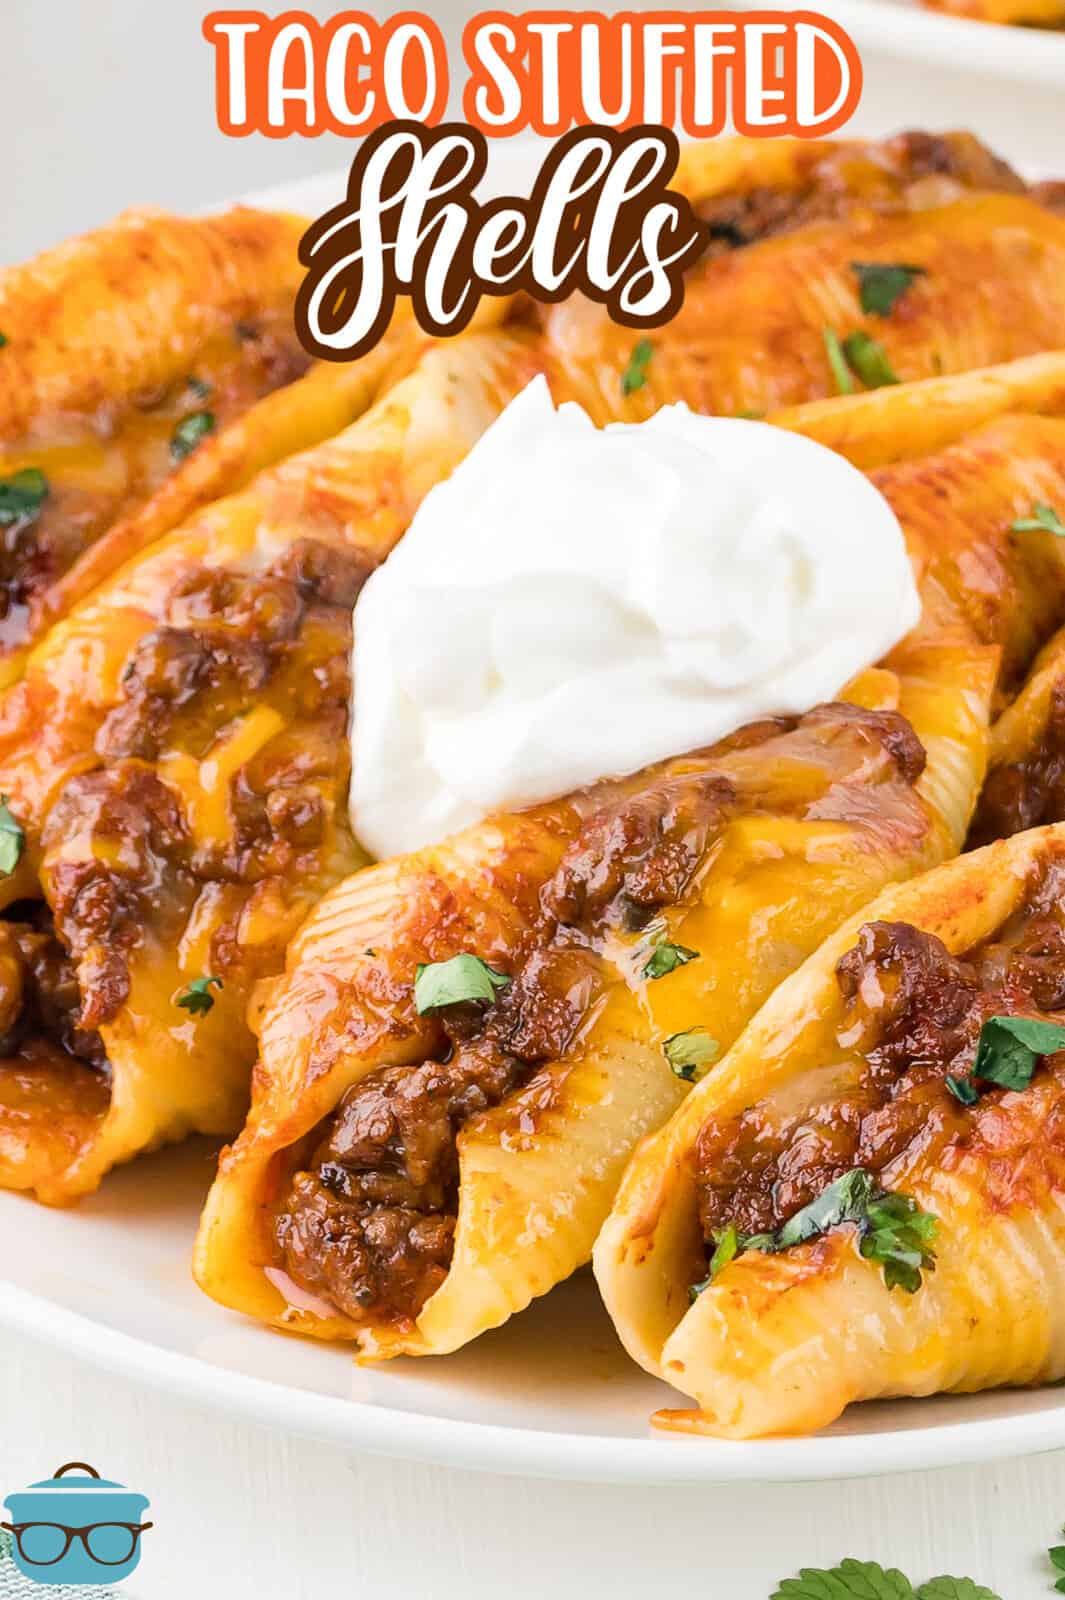 A dollop of sour cream sitting on top of some taco stuffed shells on a plate.